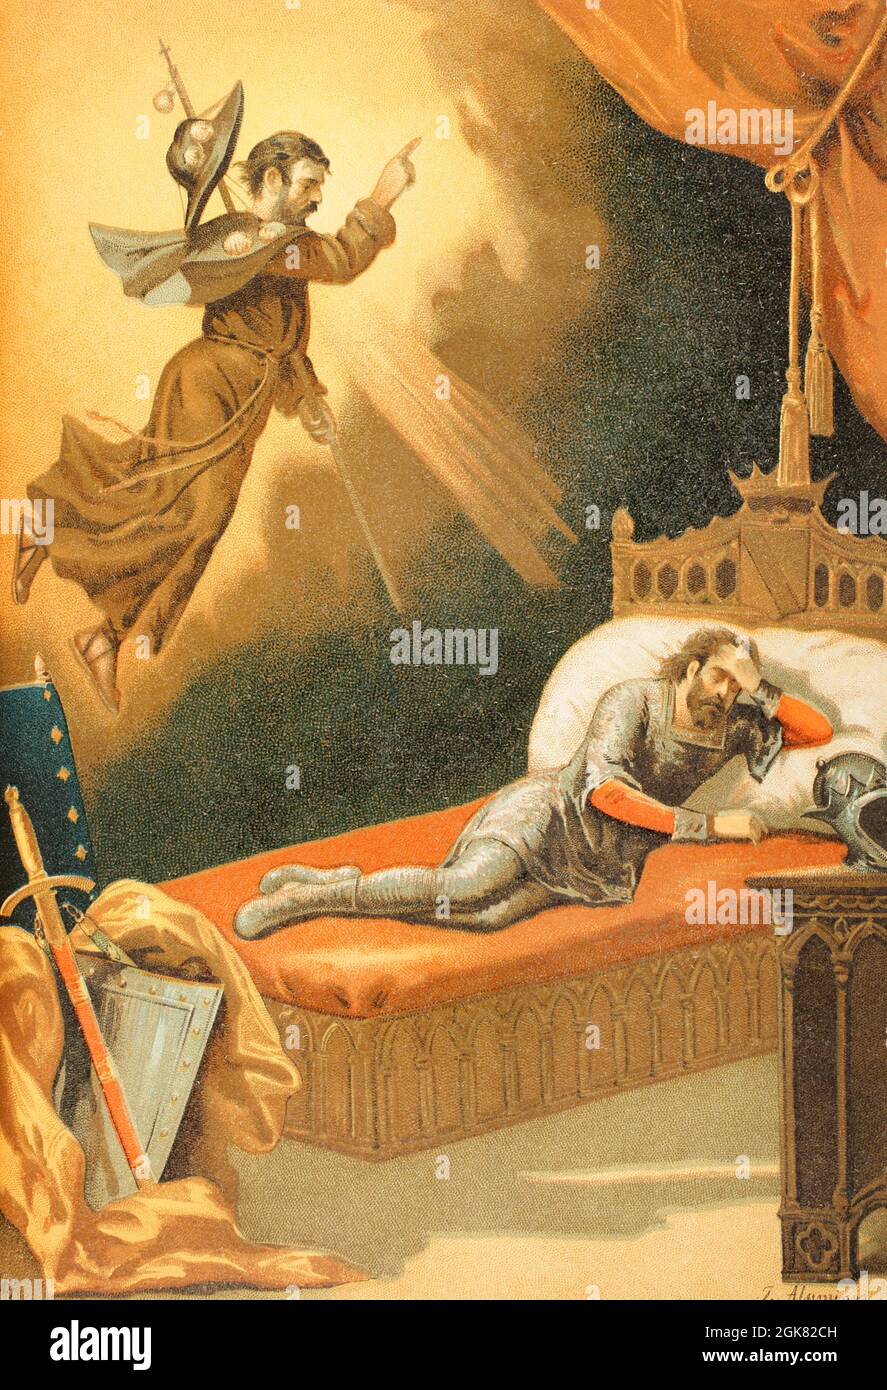 Don Ramiro's dream. Illustration that represents one of the moments before the Battle of Clavijo (May 23, 844). The King of Asturias Ramiro I (791-850), on the eve of the battle and while he slept, had a dream in which James (St. James the Apostle) appeared to him, suggesting his miraculous intervention to help the Christians win the war, advising him go into battle the next day. The apparition of James to Ramiro I. Illustration by J. Alaminos. Chromolithography. Historia General de España (General History of Spain). Volume I. Madrid, 1888. Stock Photo